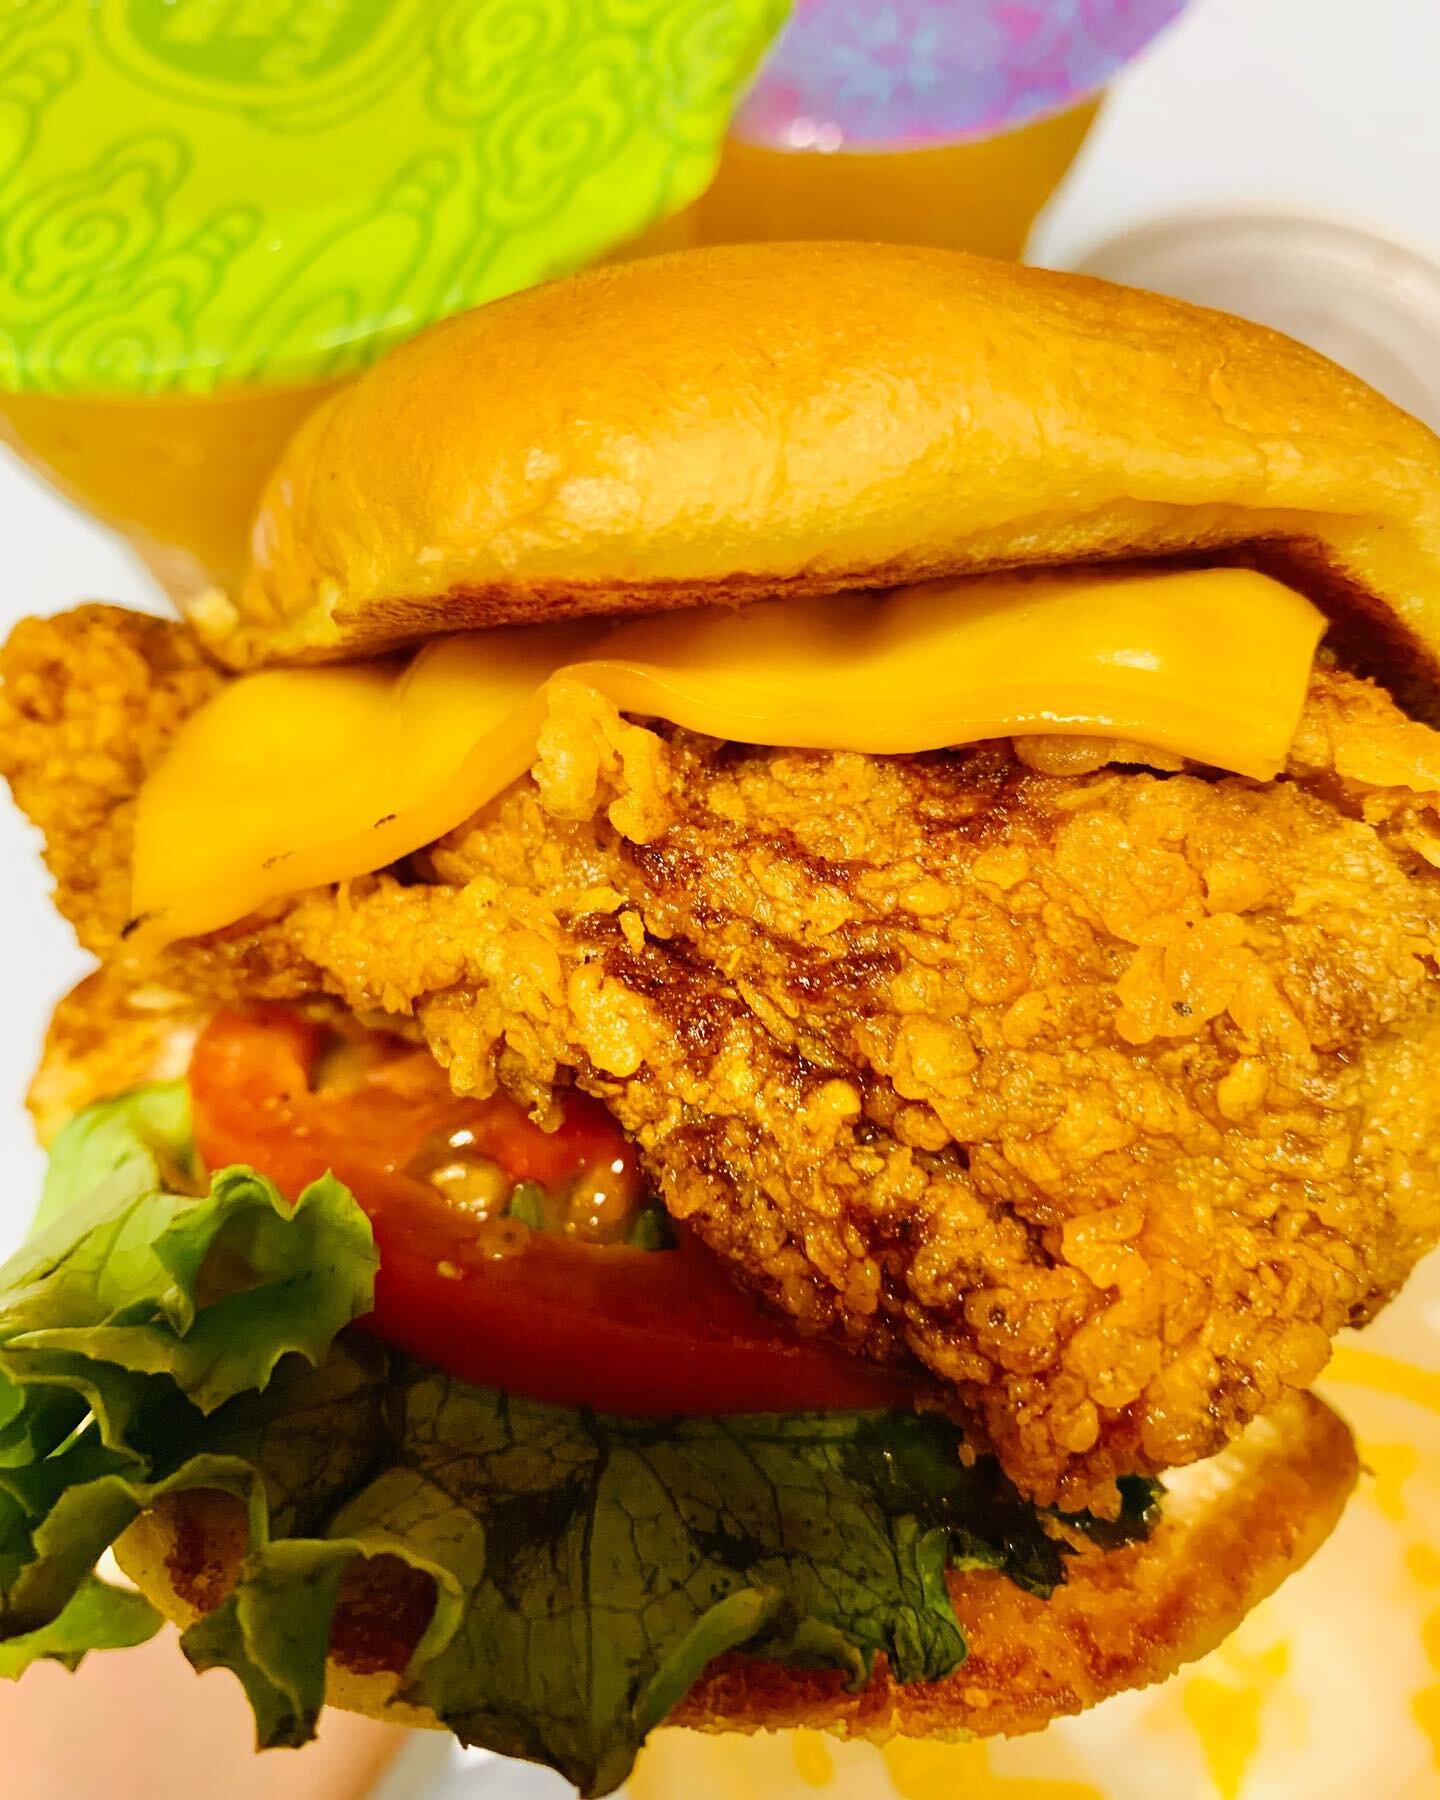 👉🏻 Send this photo of our #SpicyChickenSandwich to that one friend who always says &ldquo;I&rsquo;m not that hungry&rdquo; but asks for a bite every time 🤣 #TKKFriedChicken #KungFuTea